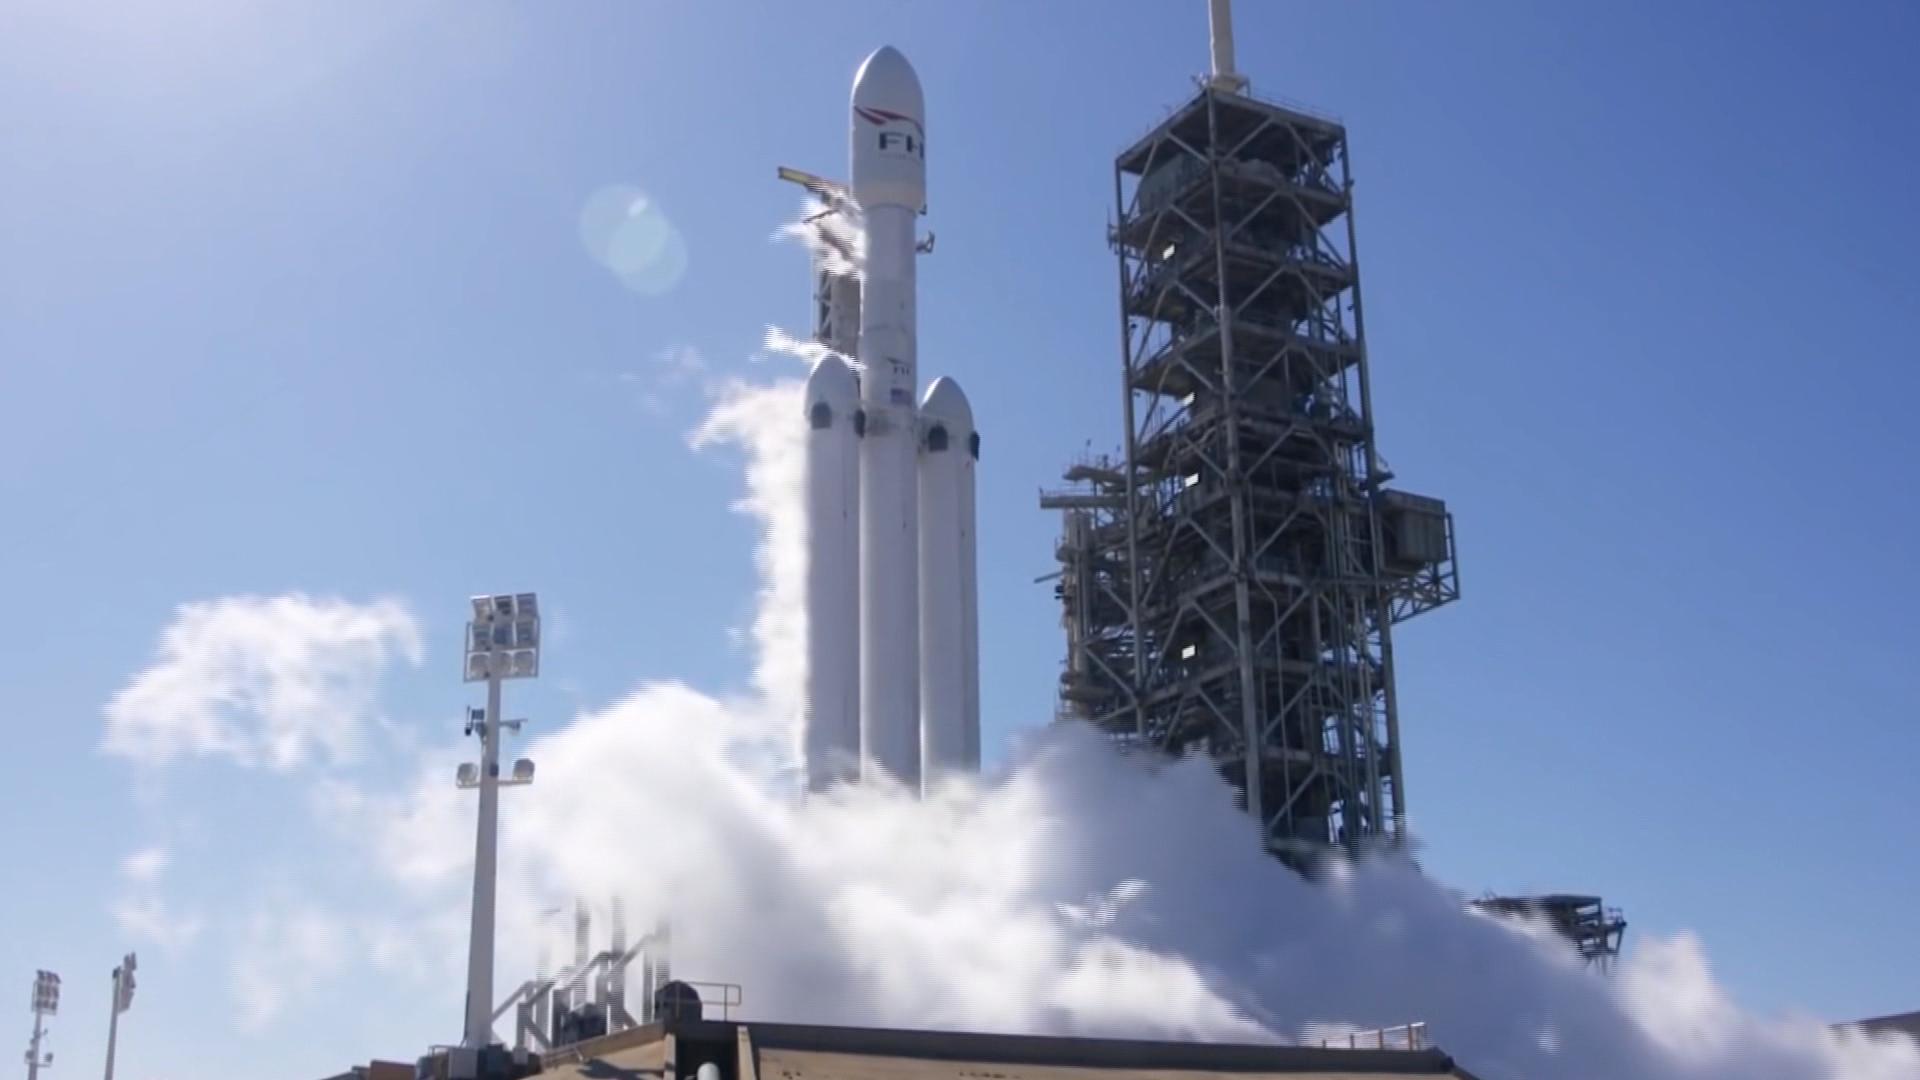 Watch live: SpaceX's Falcon heavy rocket launch